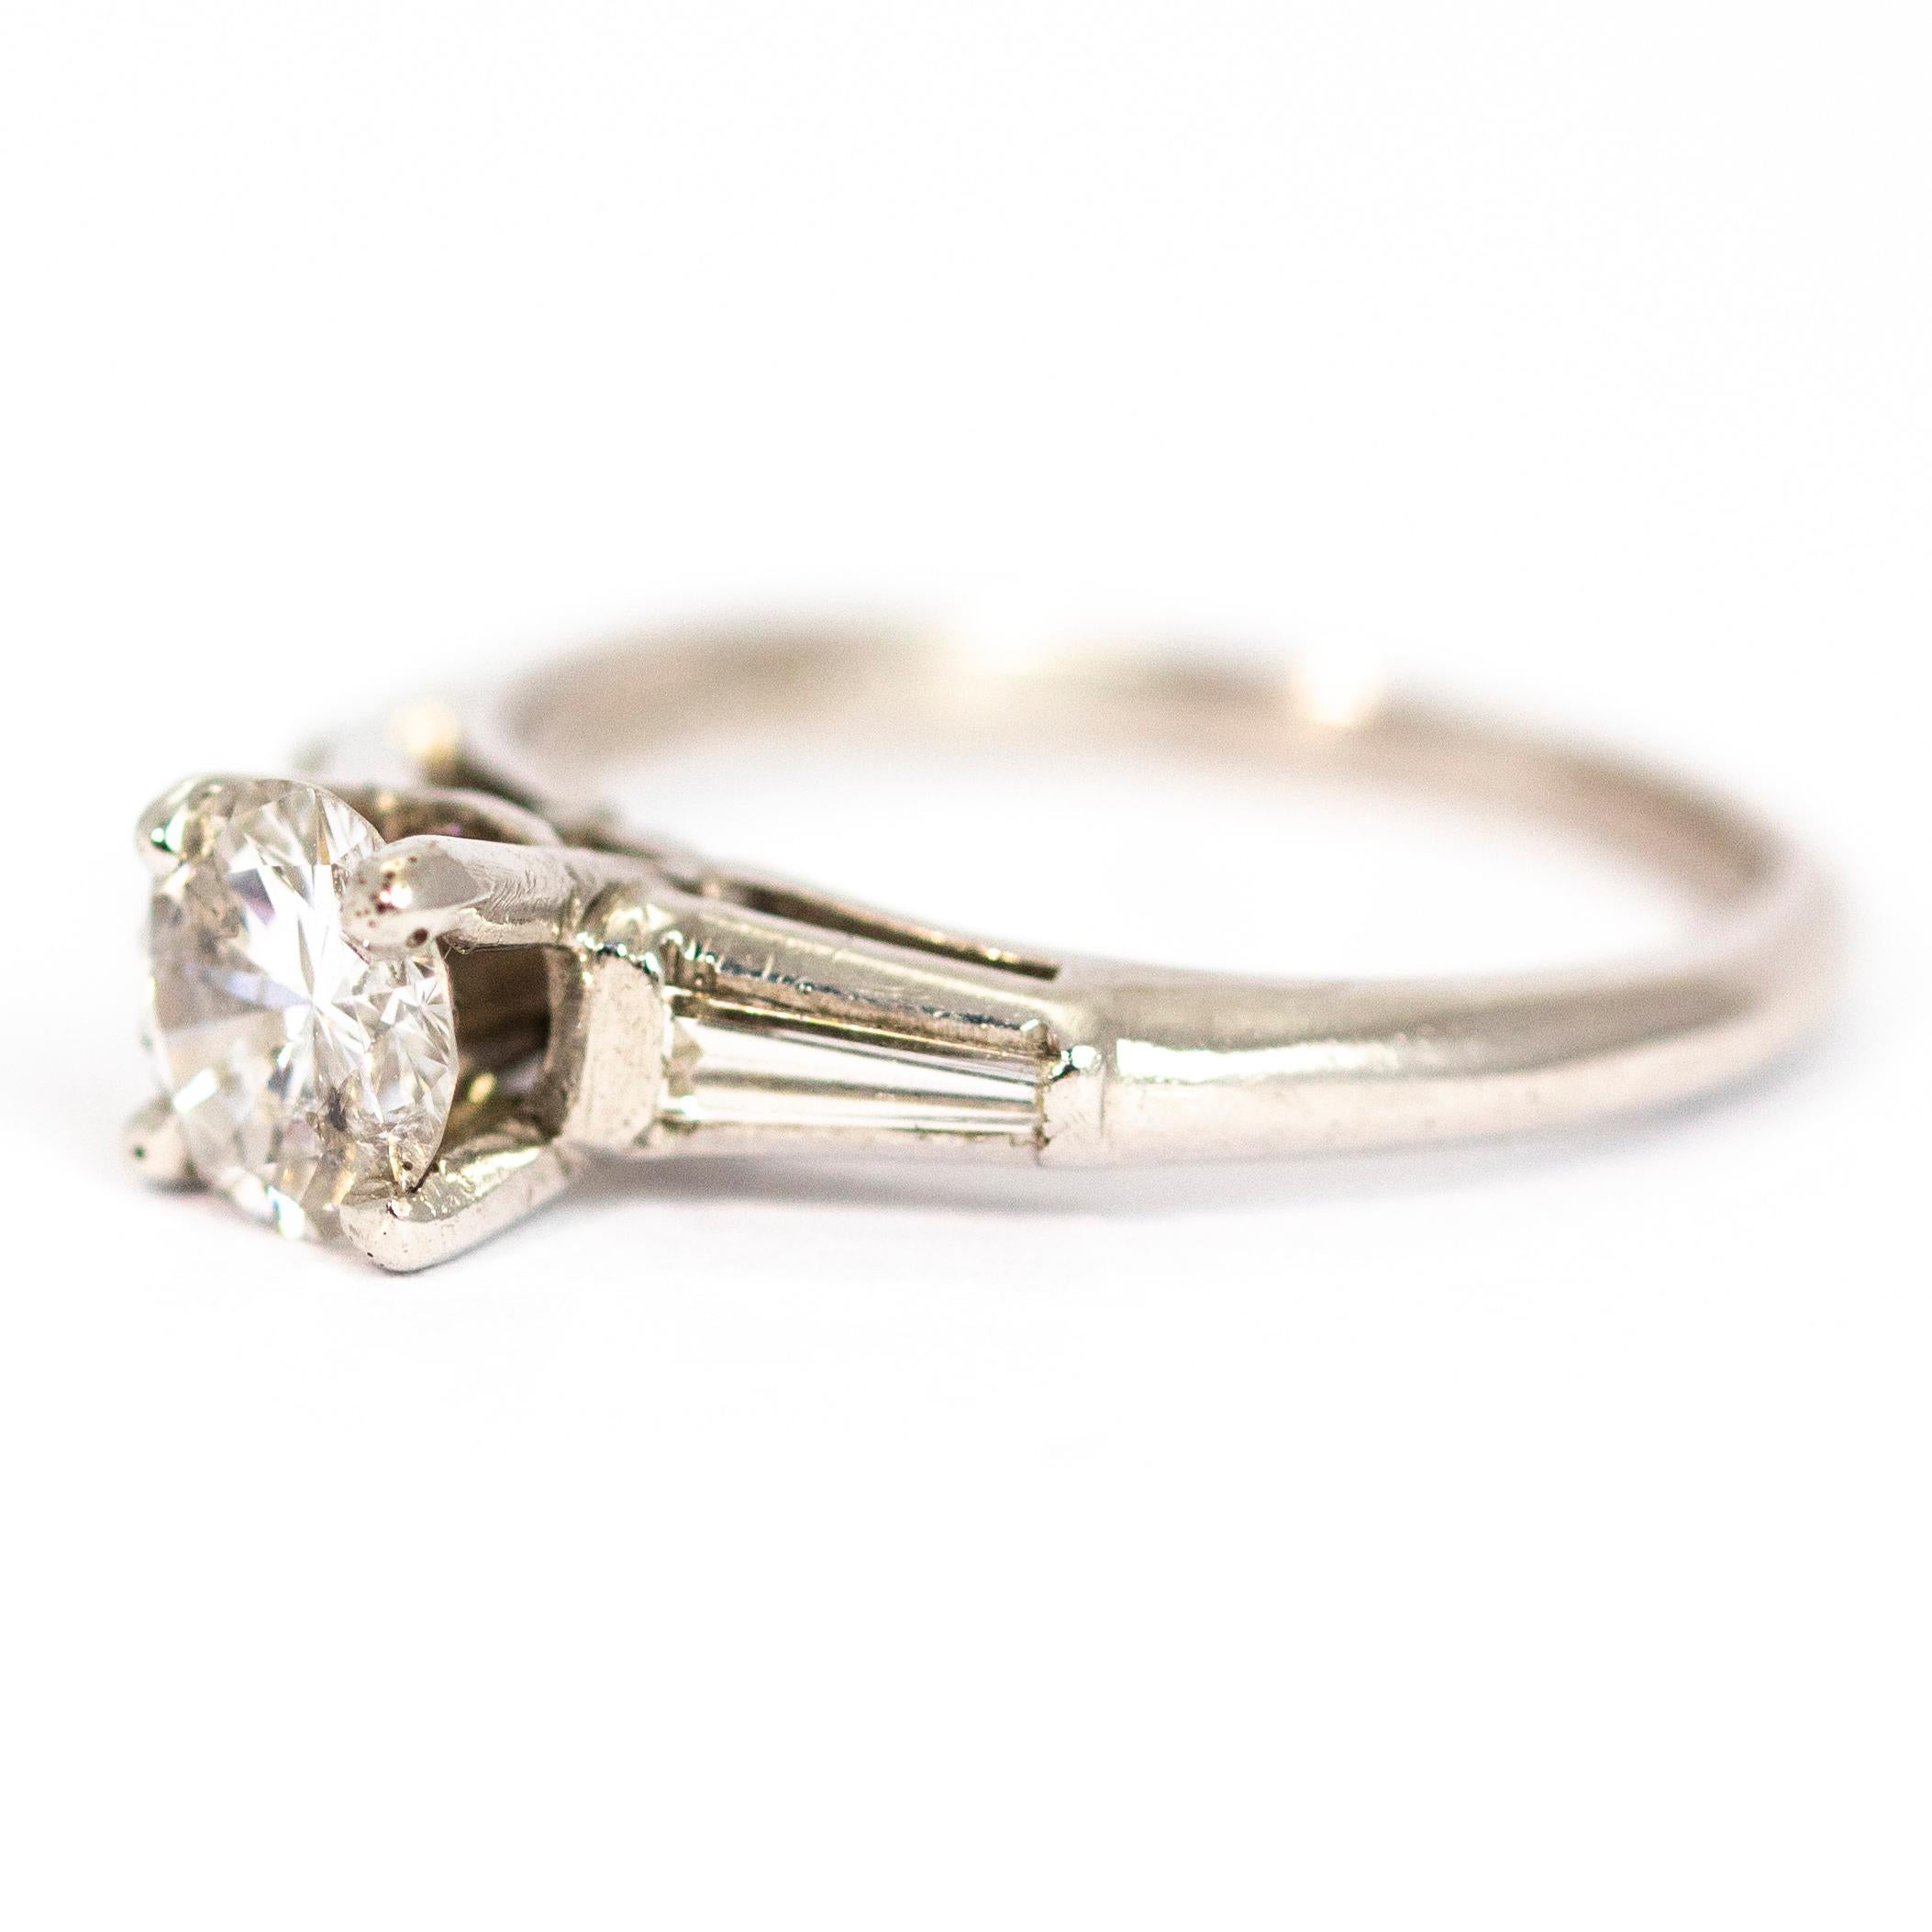 This stunning solitaire holds a 1ct diamond at the centre on top of a heightened open setting. The shoulders hold sparkling tapered baguette diamonds. This would make a stunning engagement ring or a lovely everyday ring to add that little bit of